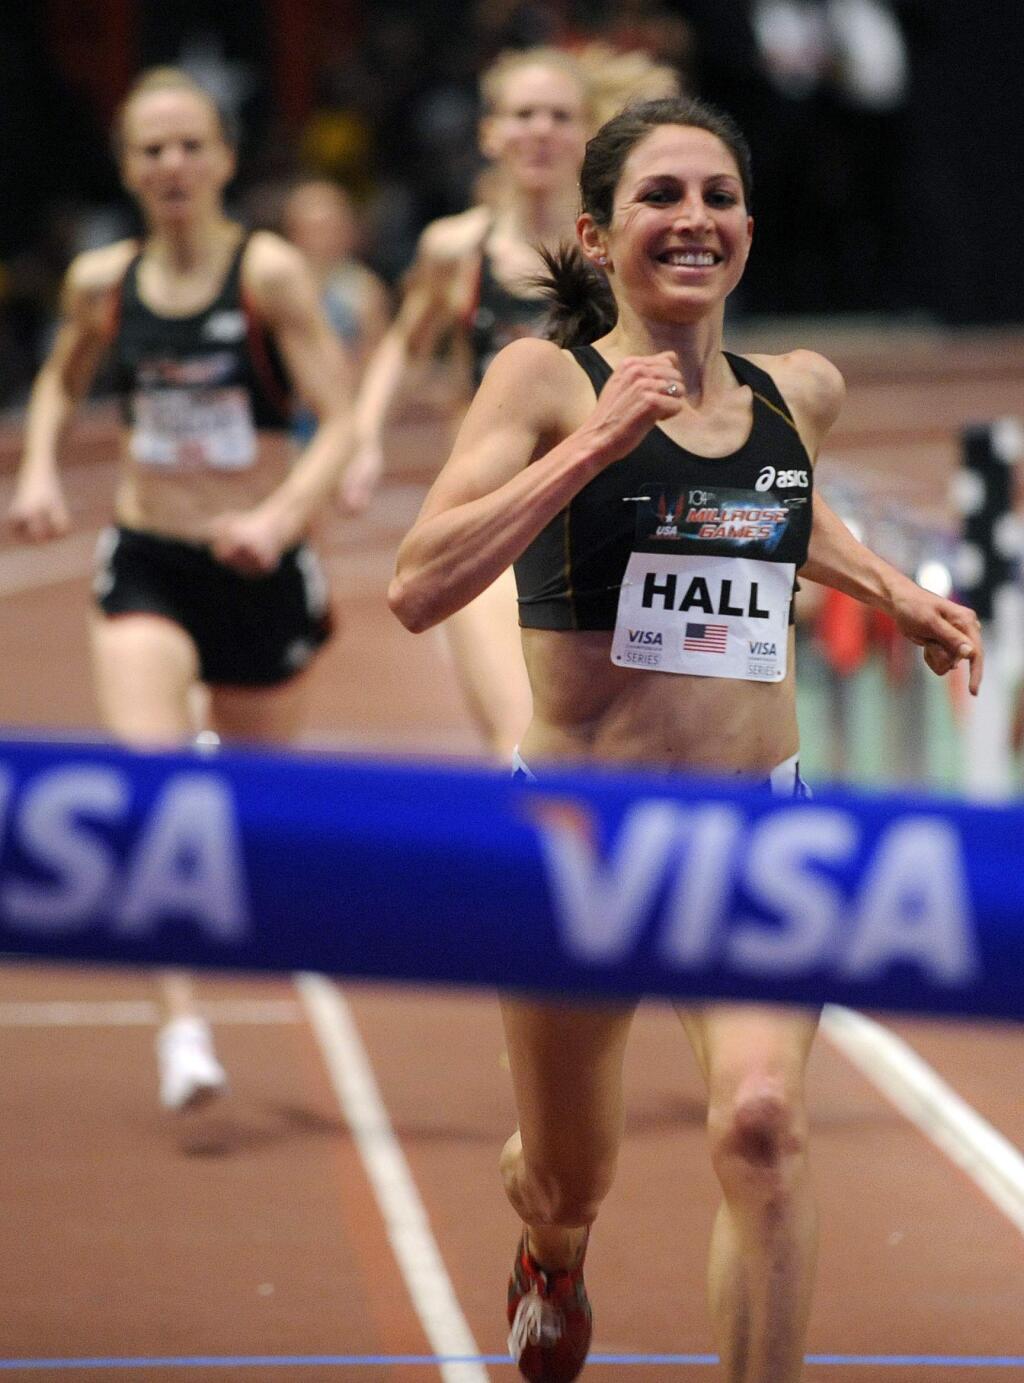 American Sara Hall wins the Women's 1500 Meter Run at the 2011 Millrose Games in Madison Square Garden in New York, Friday, Jan. 28, 2011. (AP Photo/Henny Ray Abrams)